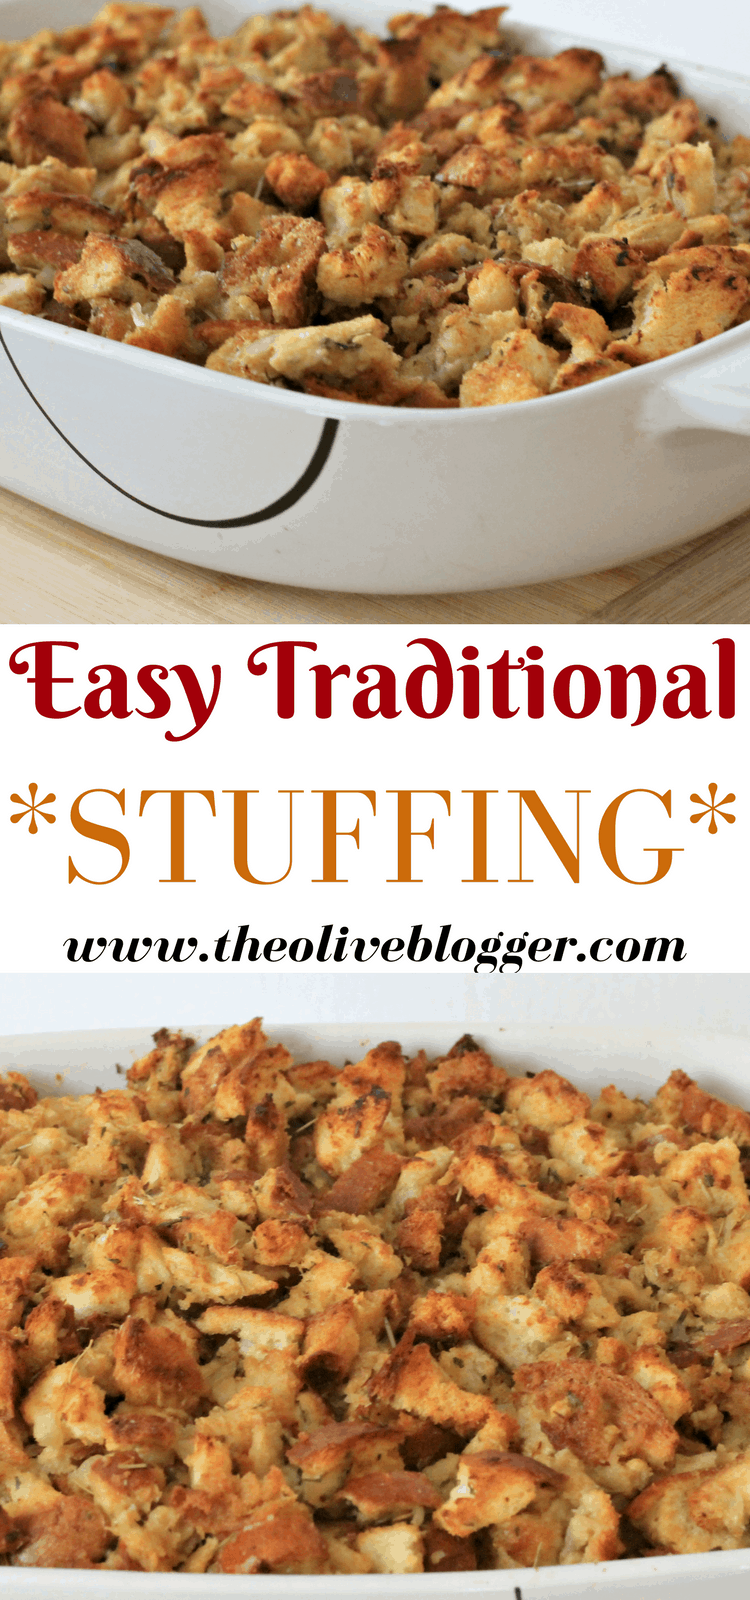 Easy Traditional Stuffing Recipe for the Holidays -   18 stuffing recipes easy thanksgiving ideas